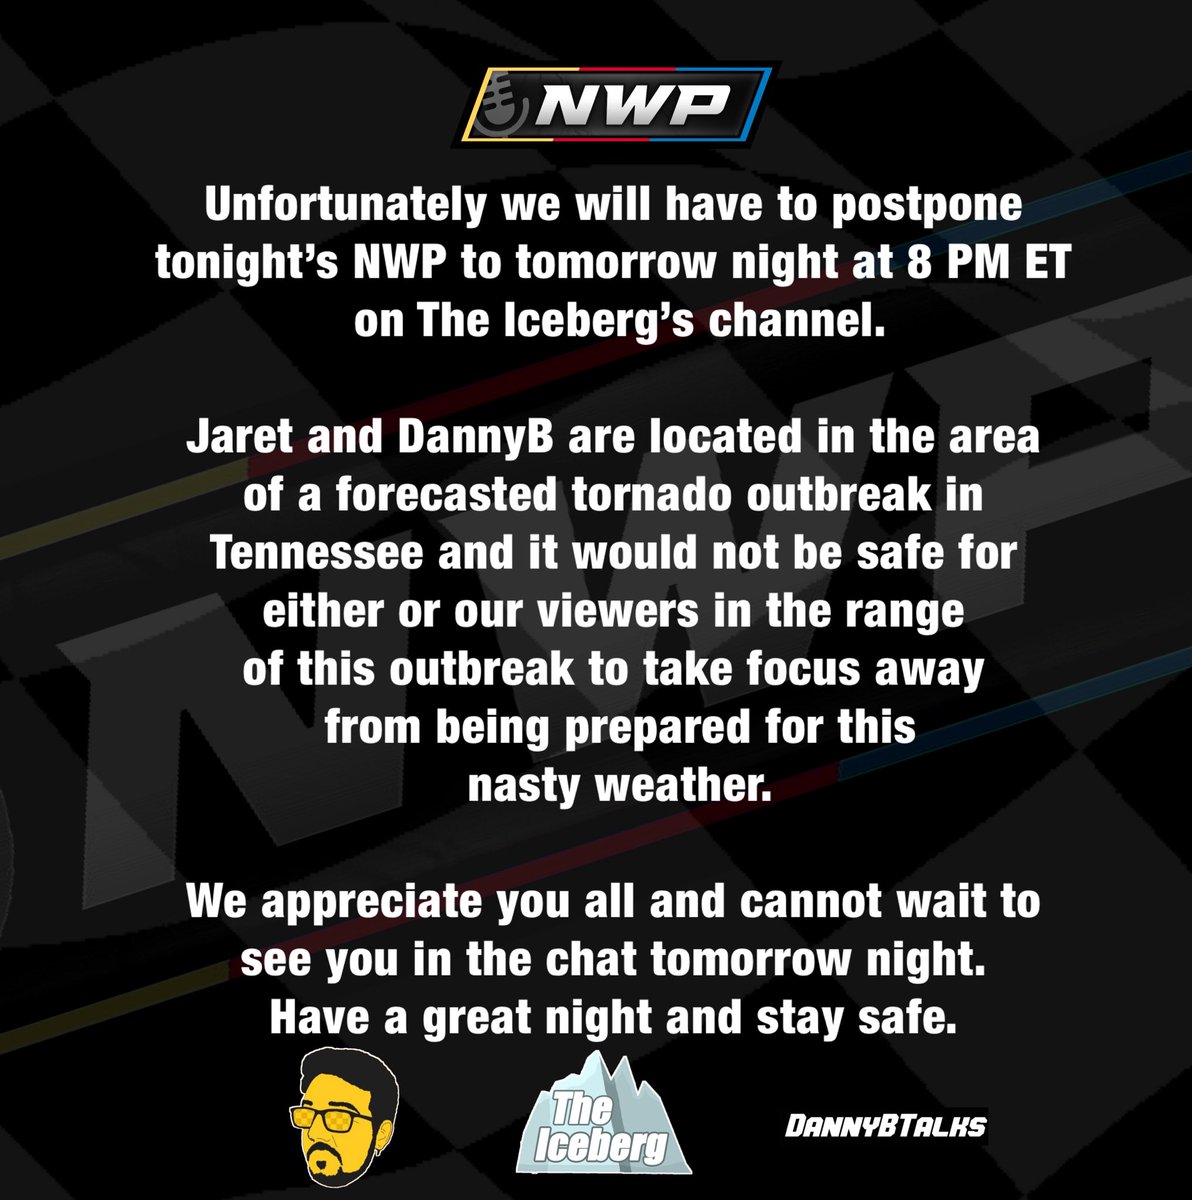 Tonight's NWP stream has been postponed to tomorrow at 8 pm EST.